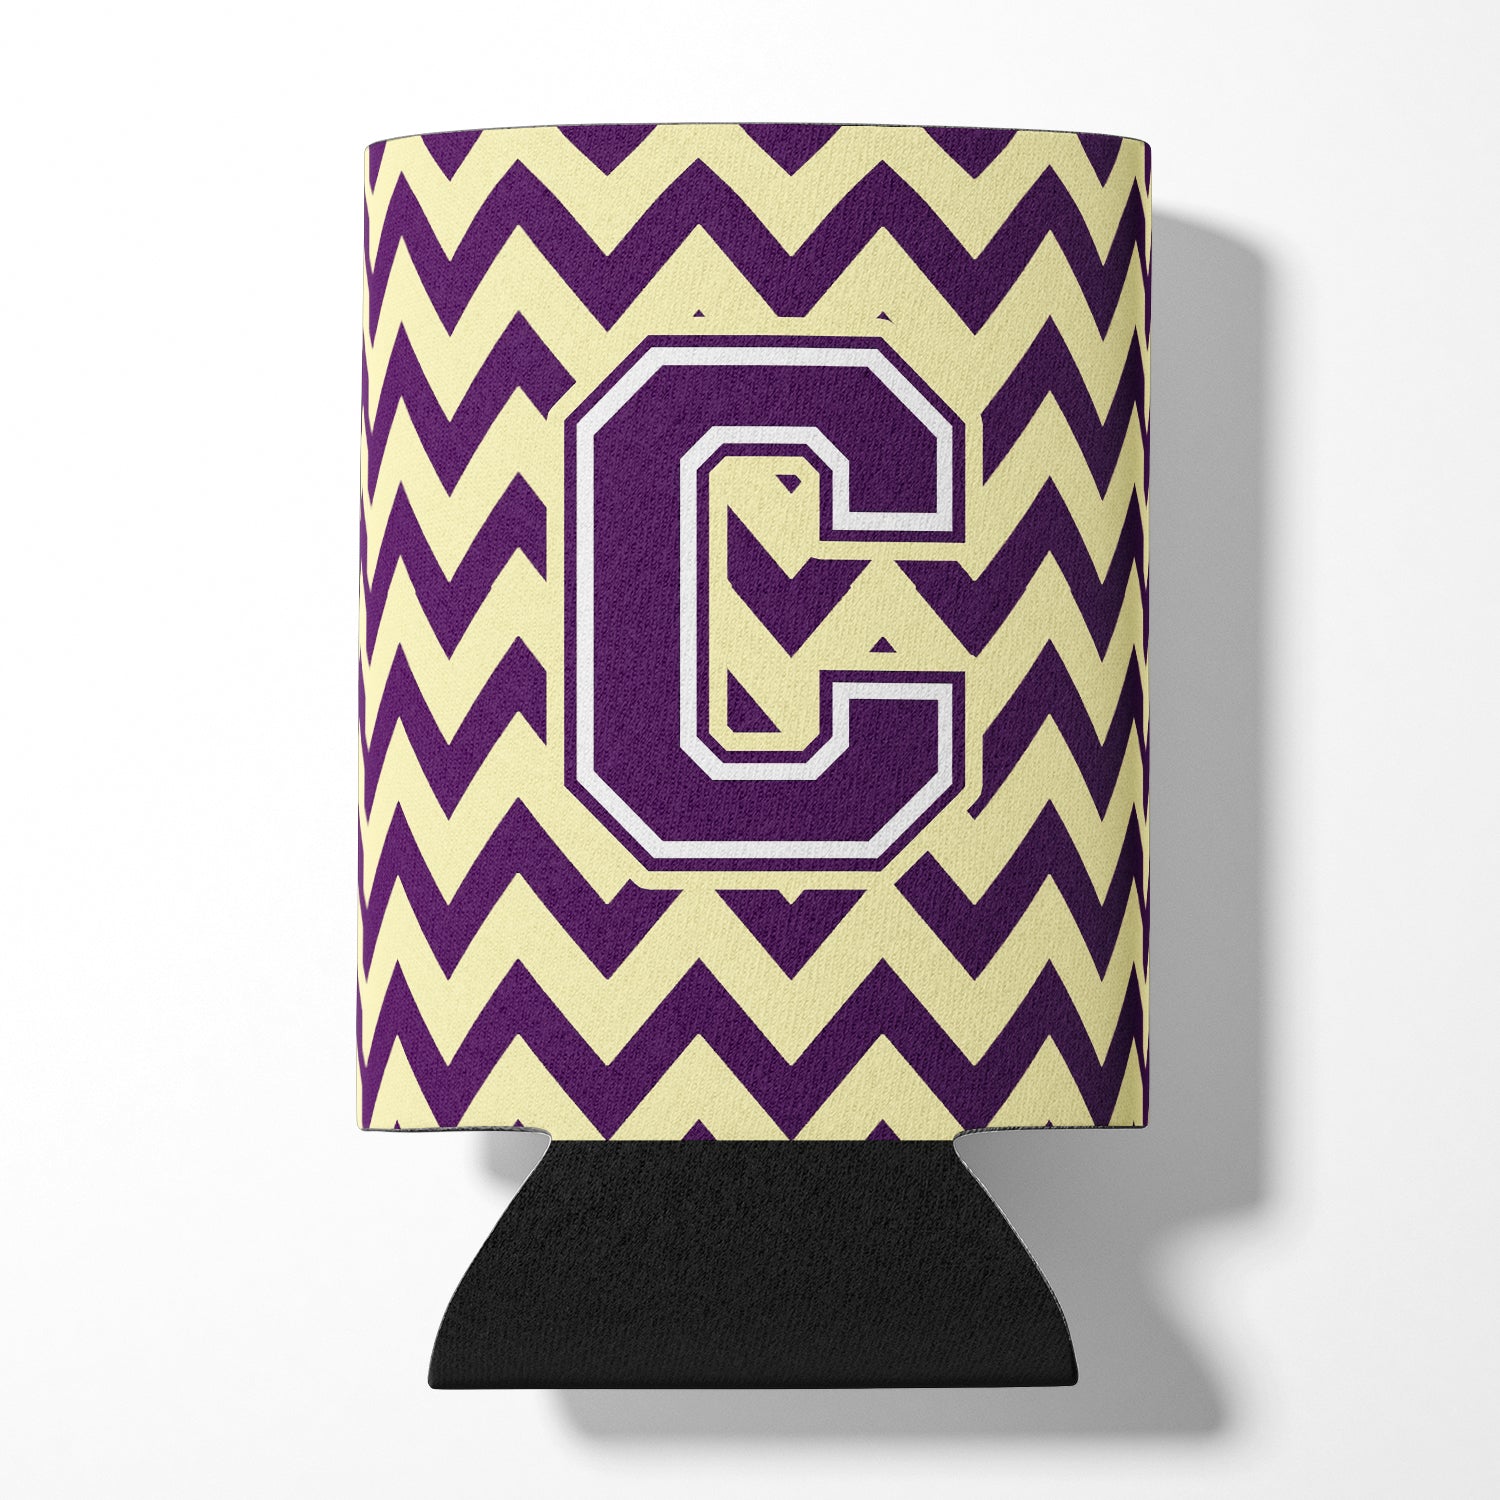 Letter C Chevron Purple and Gold Can or Bottle Hugger CJ1058-CCC